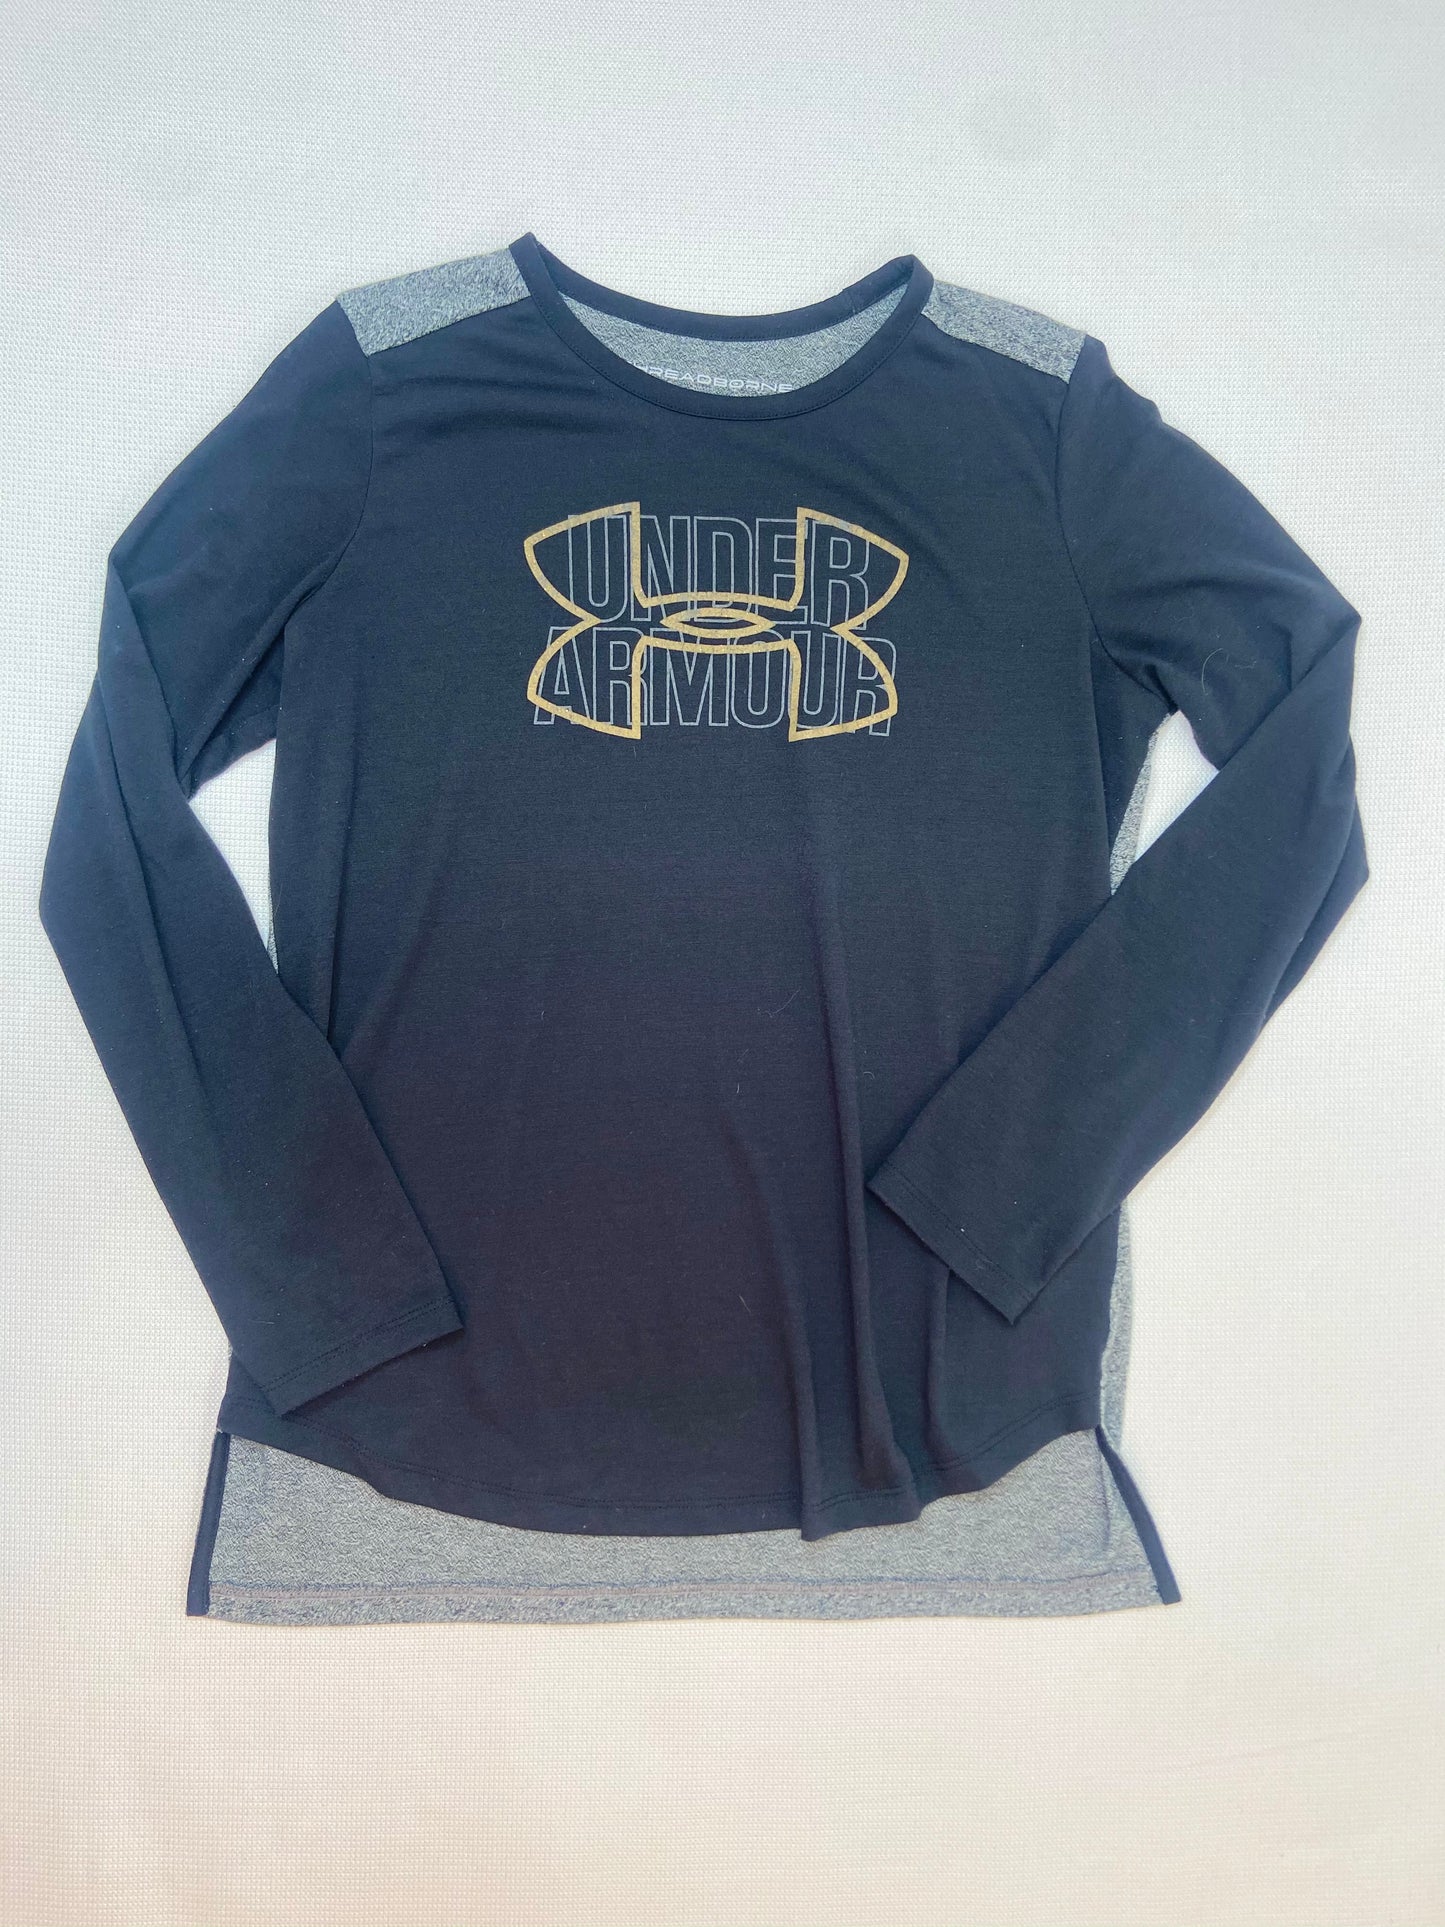 Black Front and Gray Back Long Sleeve Under Armour- S